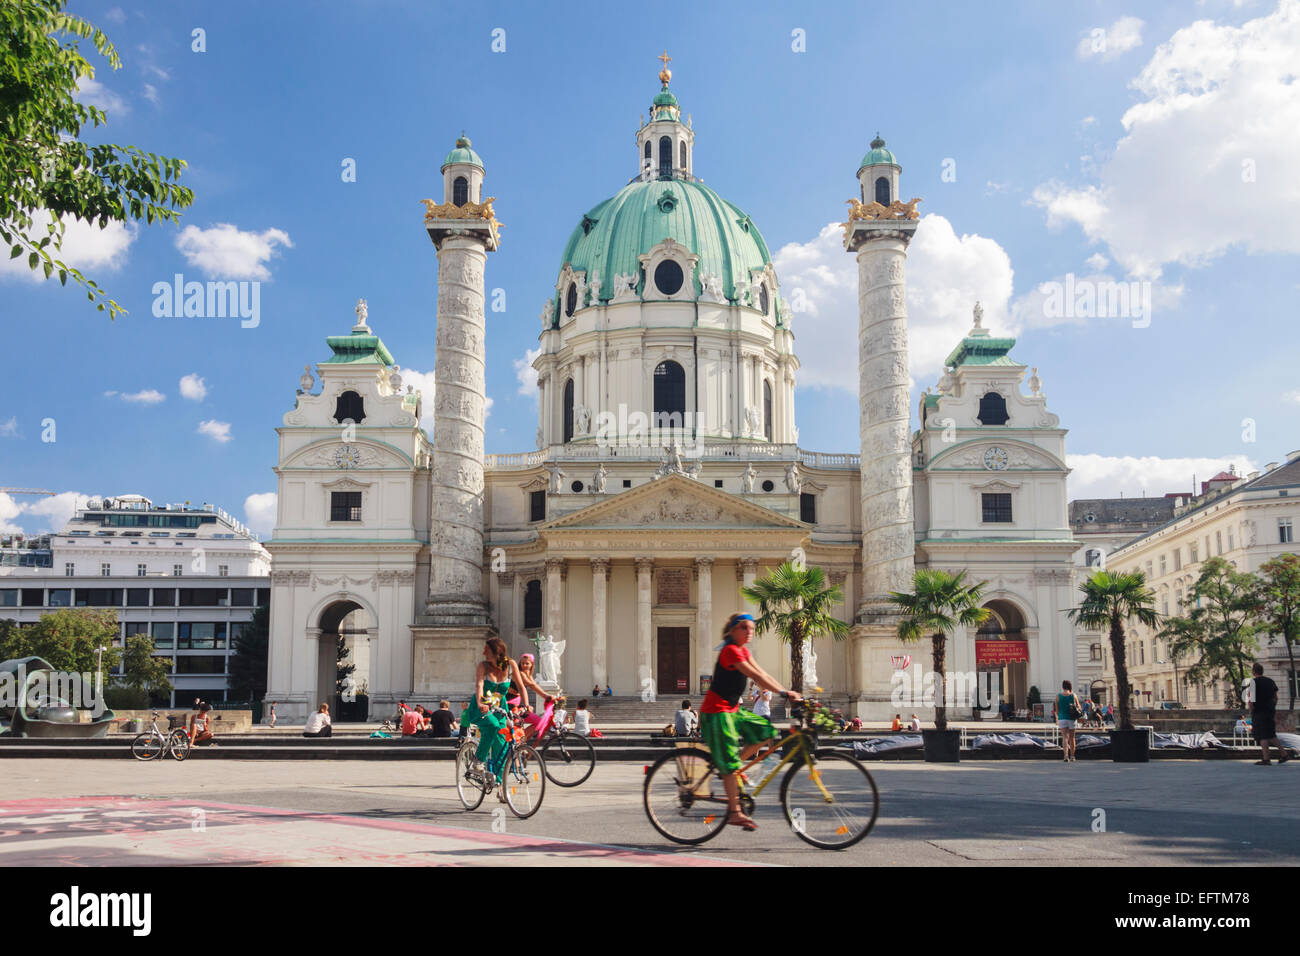 Cyclists by the Baroque Karlskirche, in Vienna, Austria Stock Photo